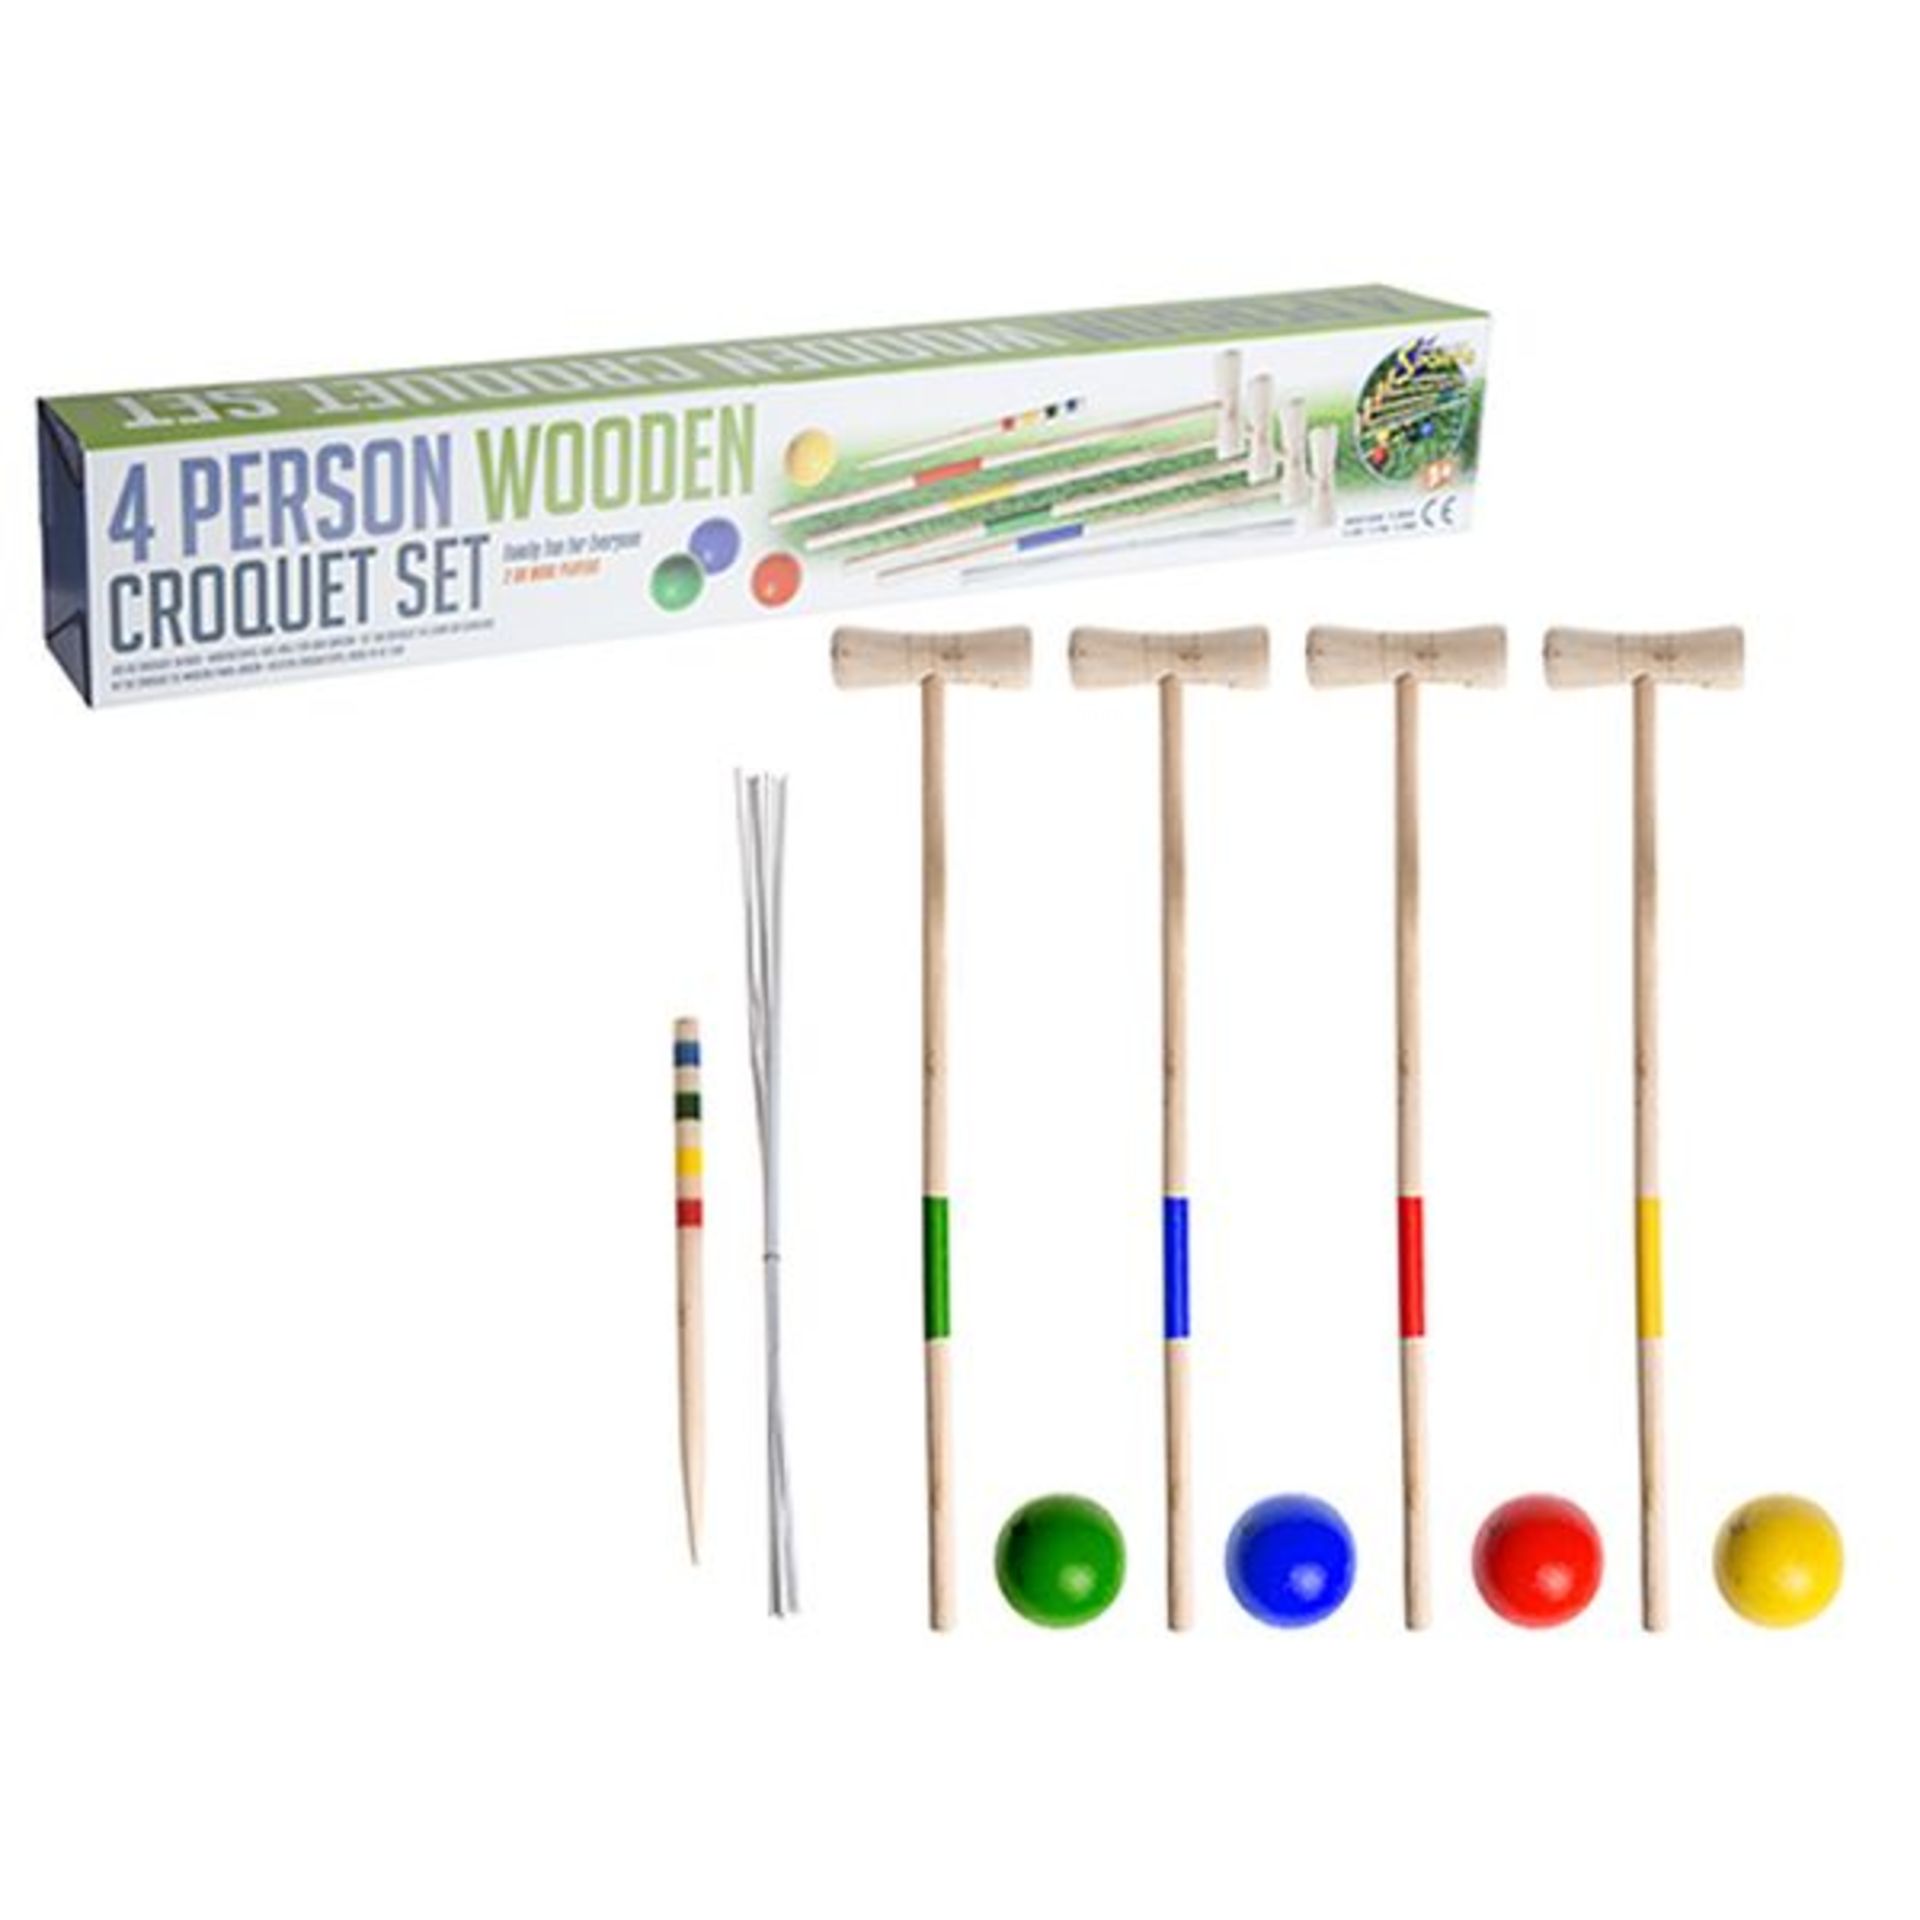 V *TRADE QTY* Brand New Premier Sports Four Person Wooden Croquet Set X 4 YOUR BID PRICE TO BE